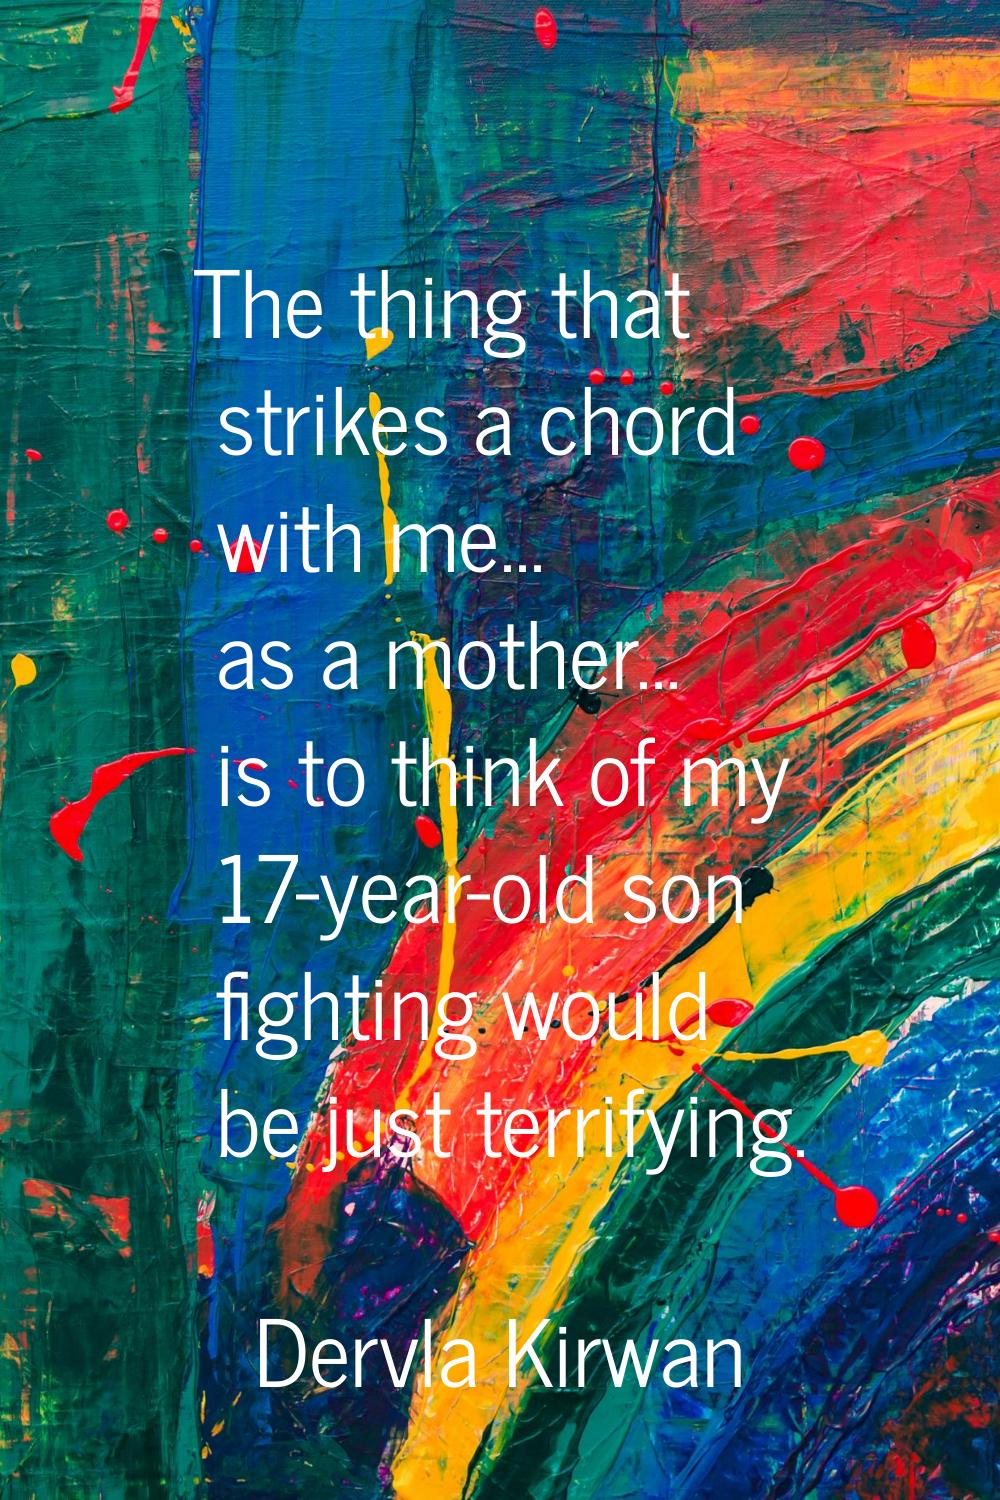 The thing that strikes a chord with me... as a mother... is to think of my 17-year-old son fighting